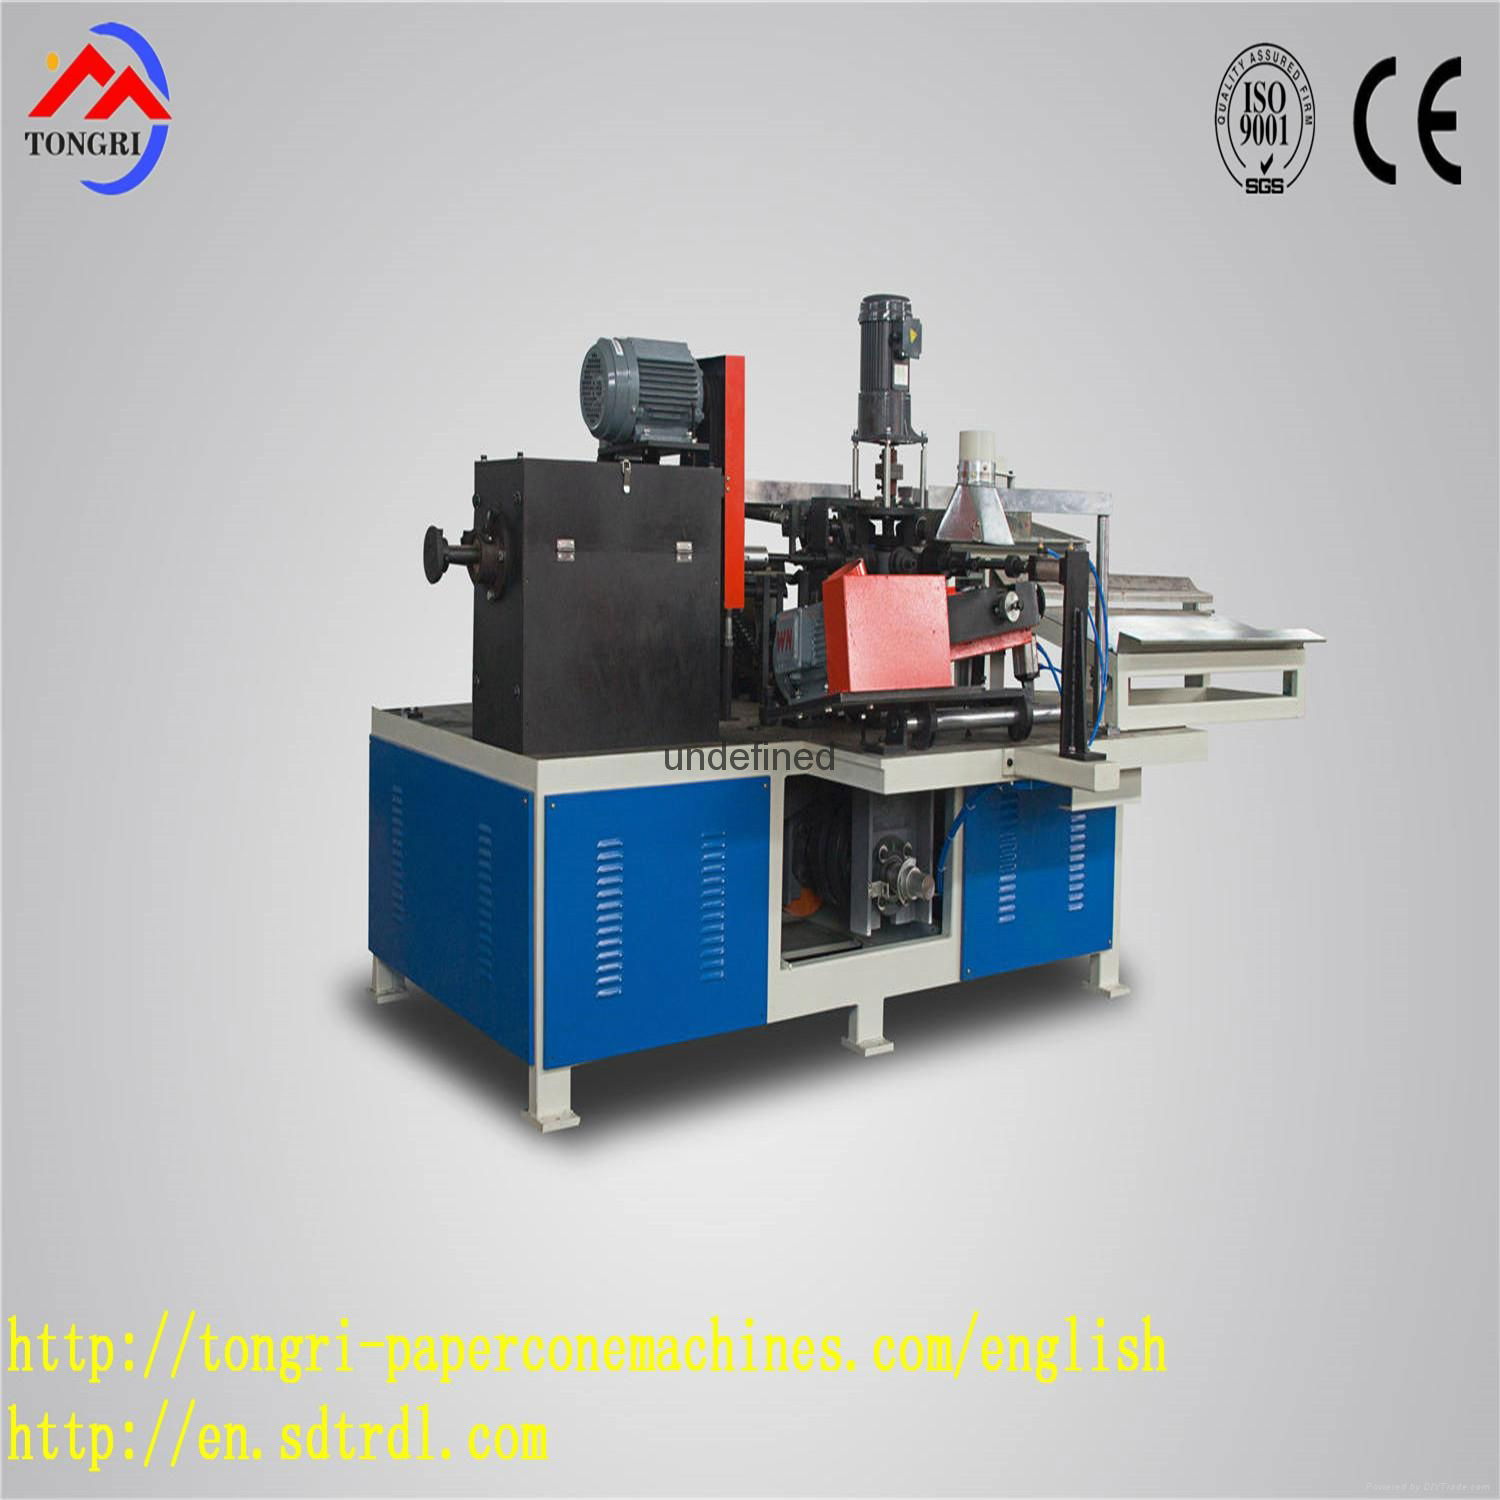 TRZ-2012 full automatic conical paper tube production line 3